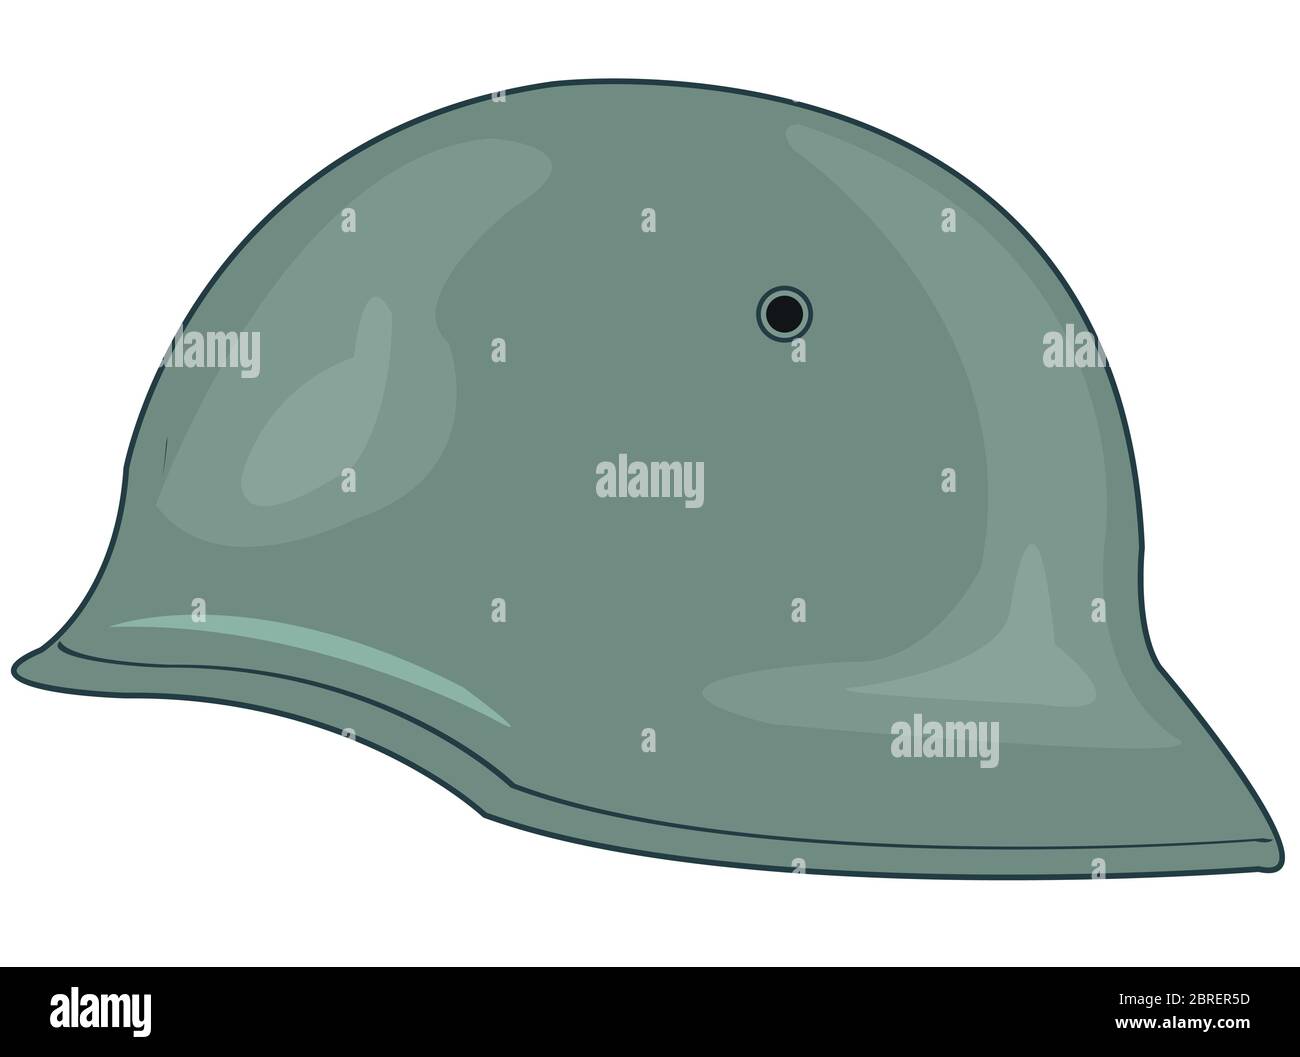 Helmet of the german soldier on white background is insulated Stock Vector